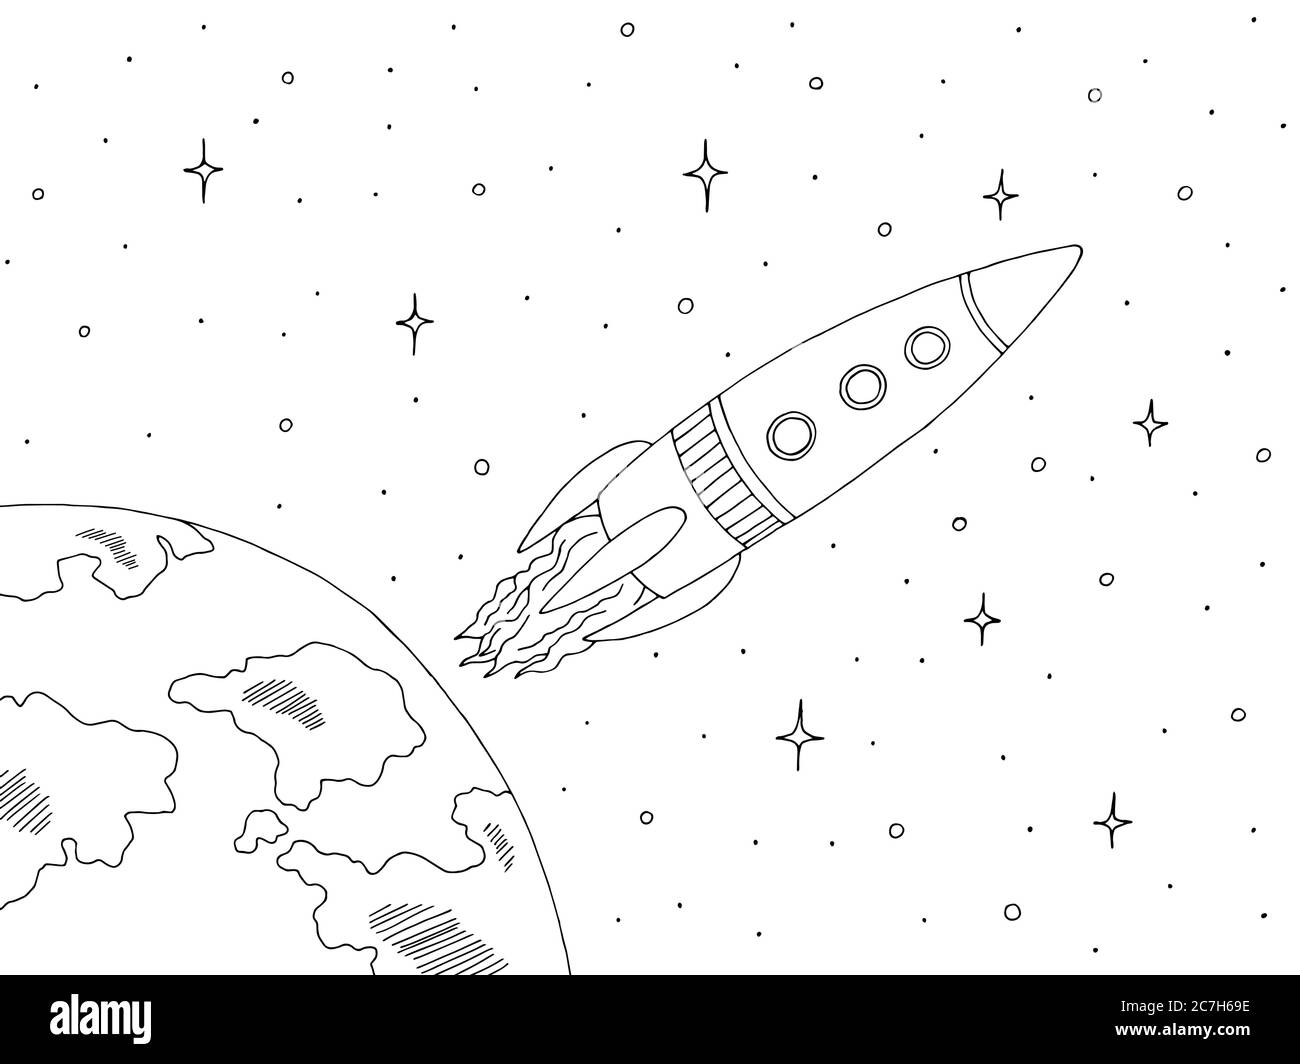 Rocket in space graphic black white sketch illustration vector Stock Vector